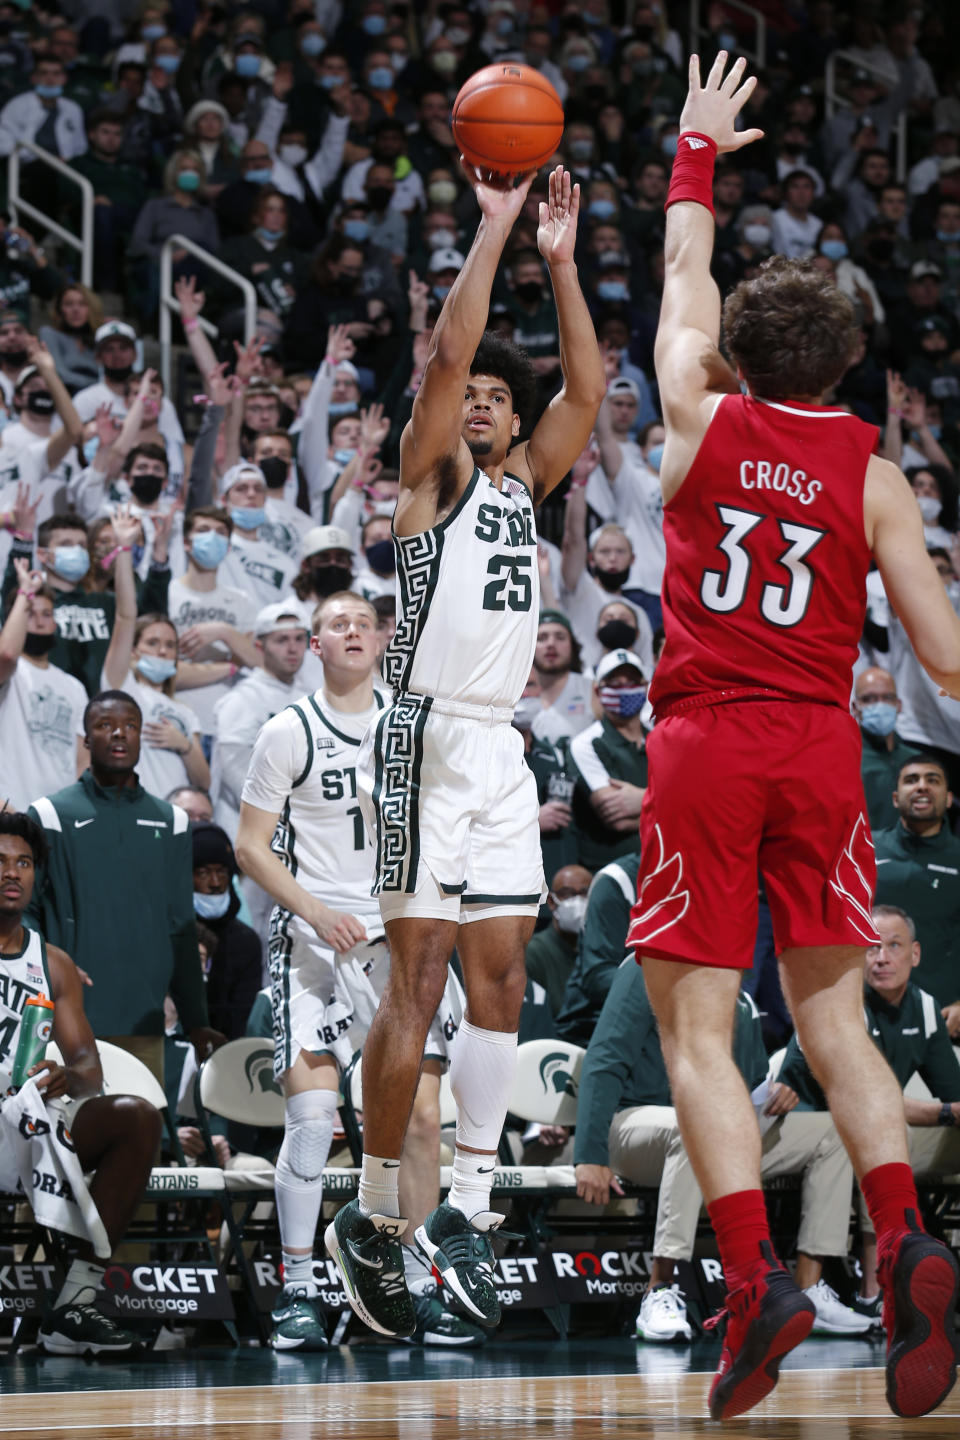 Michigan State's Malik Hall (25) shoots a 3-pointer against Louisville's Matt Cross (33) during the second half of an NCAA college basketball game Wednesday, Dec. 1, 2021, in East Lansing, Mich. (AP Photo/Al Goldis)